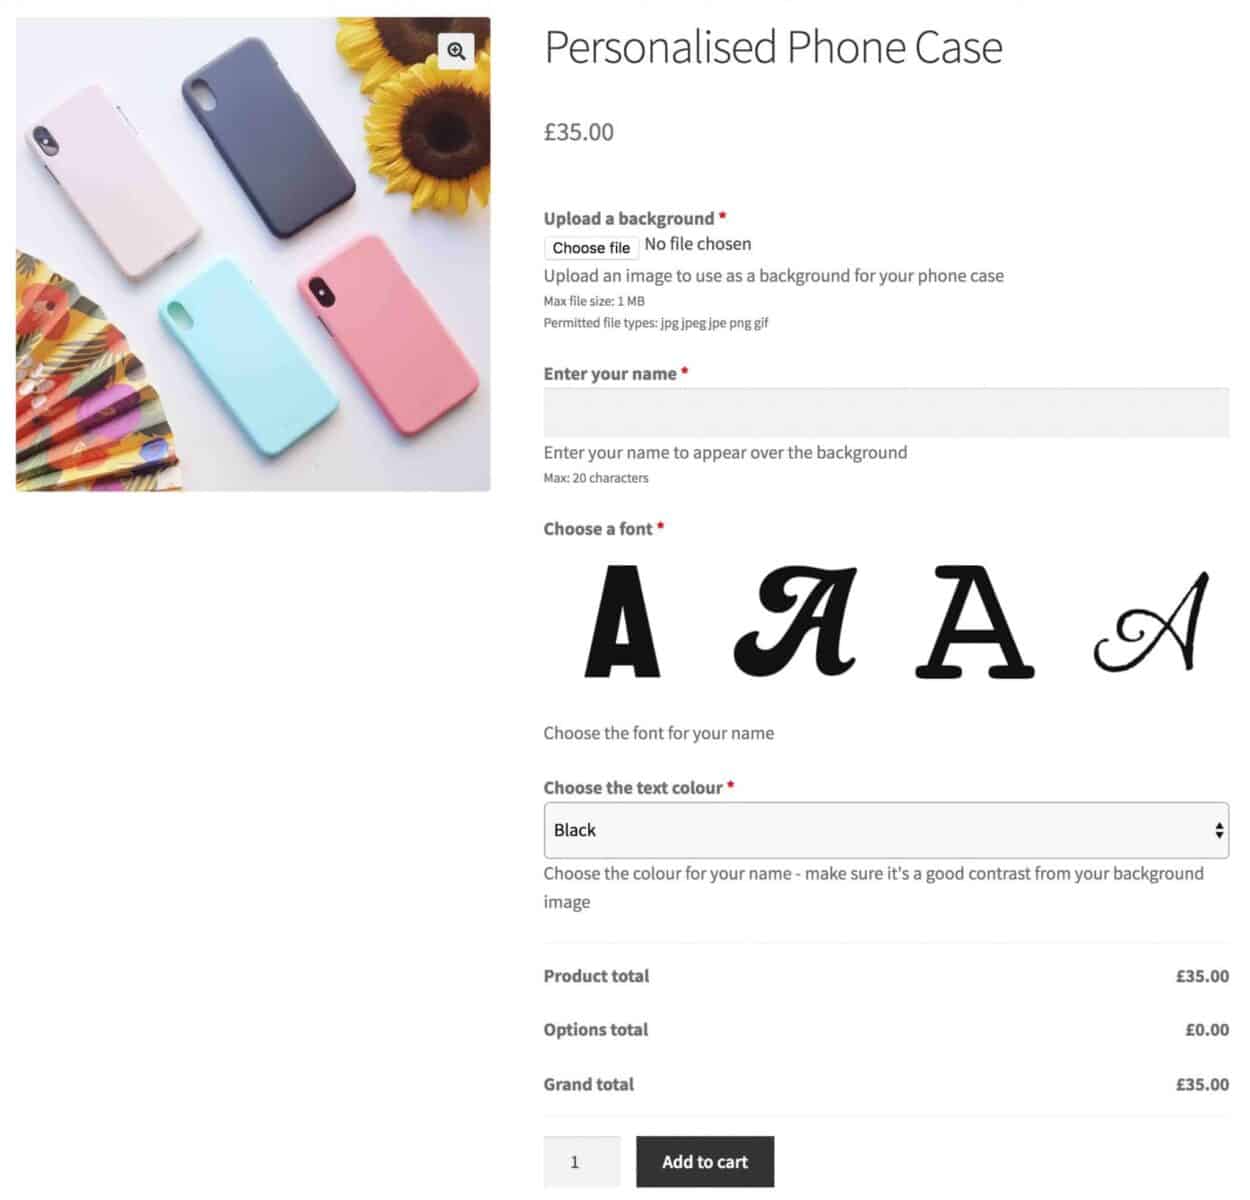 WooCommerce product customizer for personalized phone cases